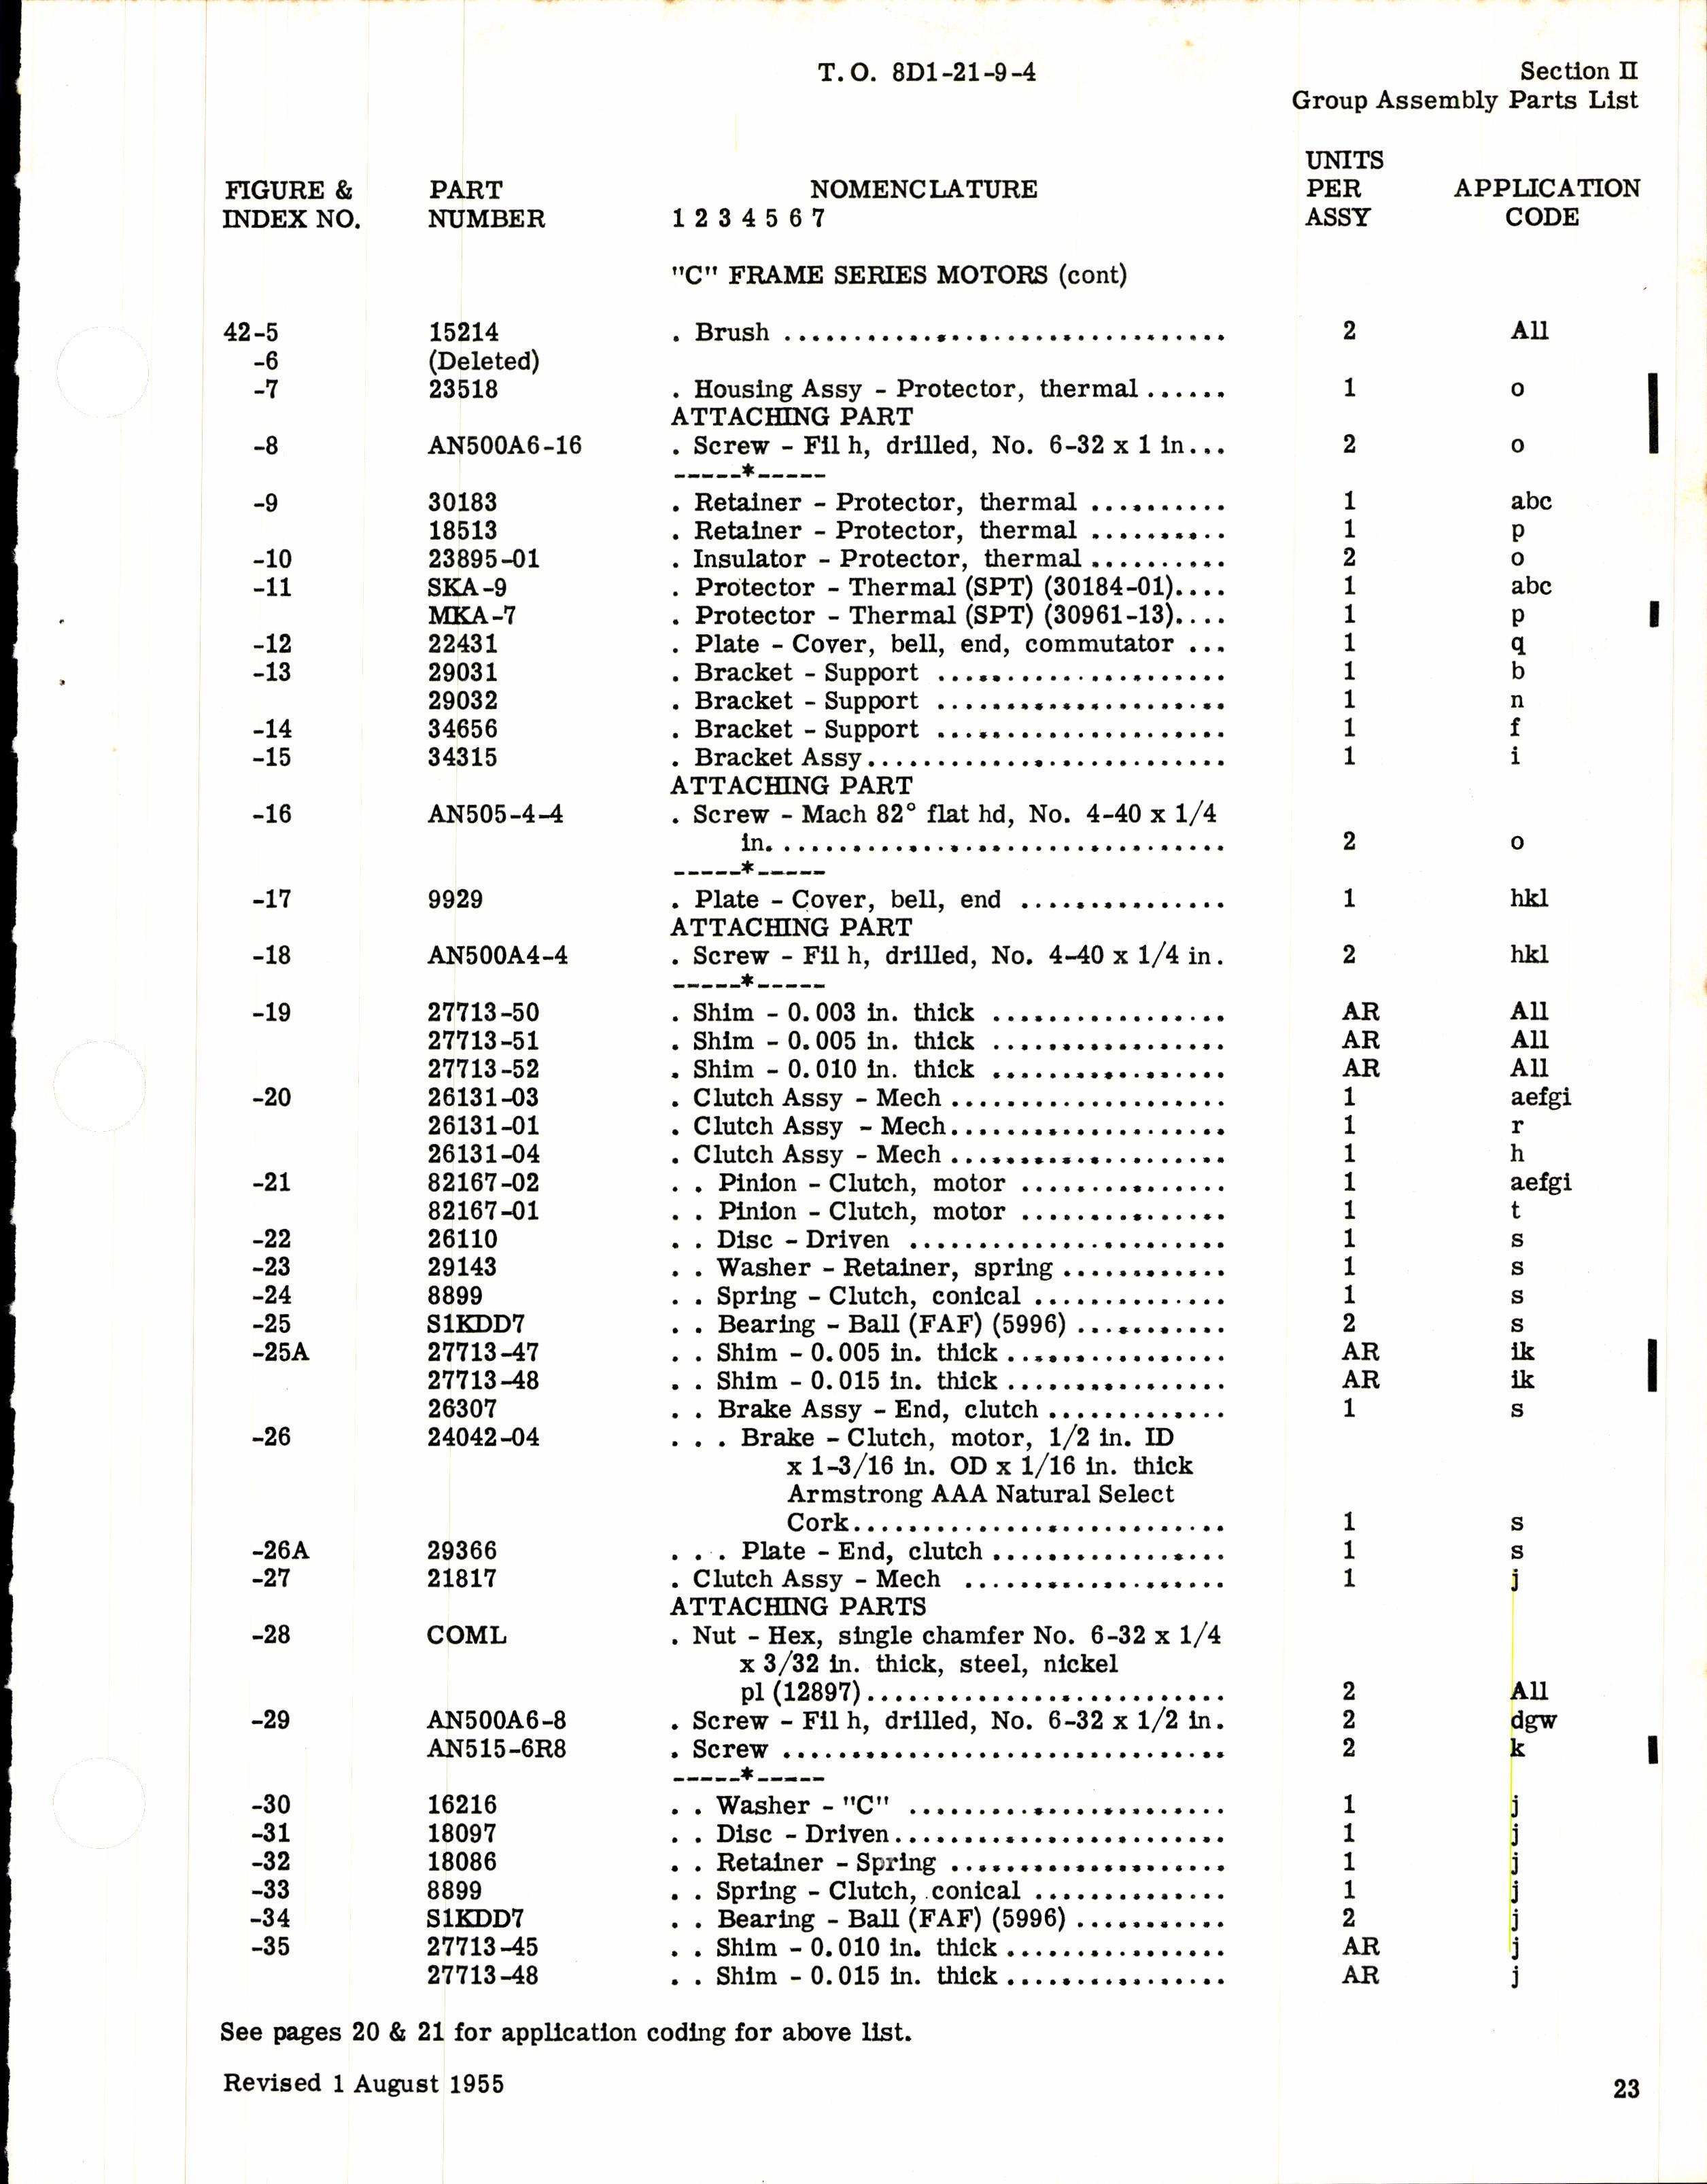 Sample page 5 from AirCorps Library document: Parts Catalog for Lear Control Box Assemblies and Motors